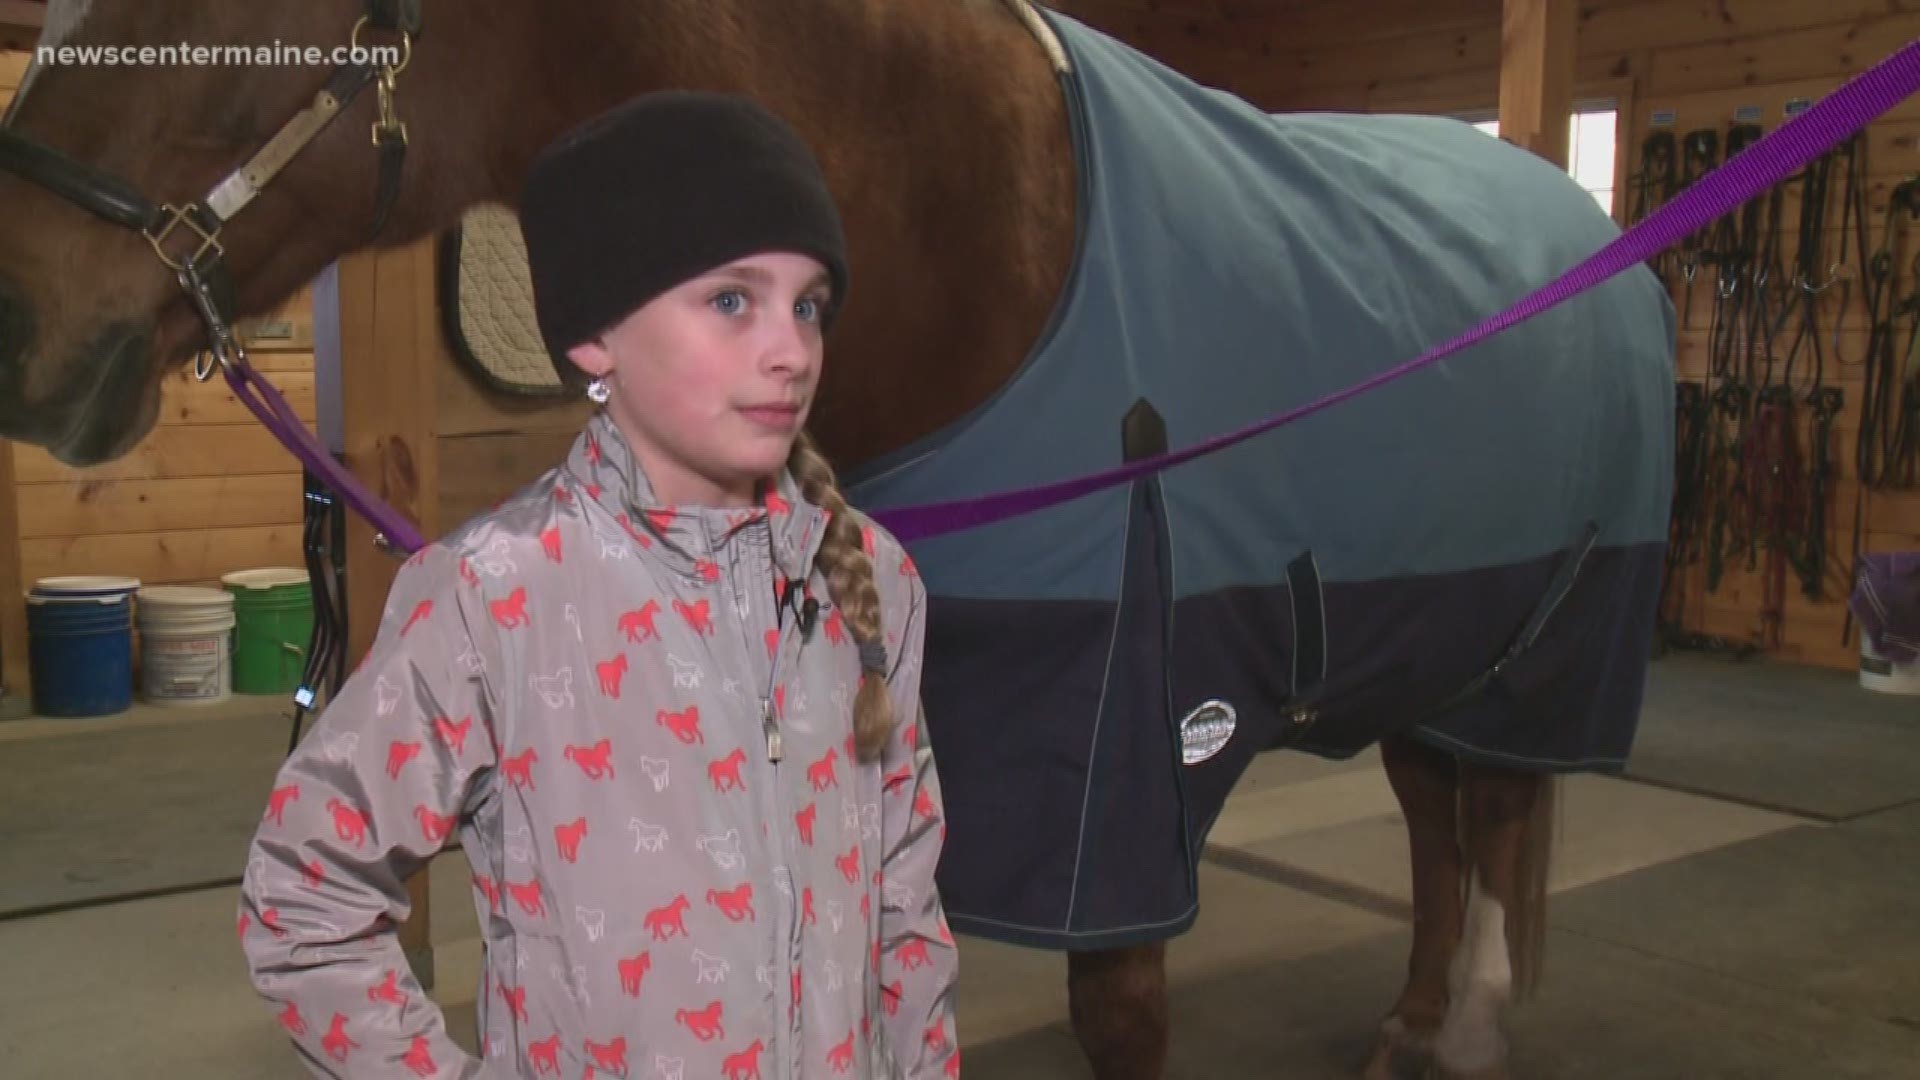 Helping animals who need a forever home. Making sure children don't go hungry when school's not in session. At just 8 years-old - those are some of the ways Allie Mannette has paid it forward during the holidays.